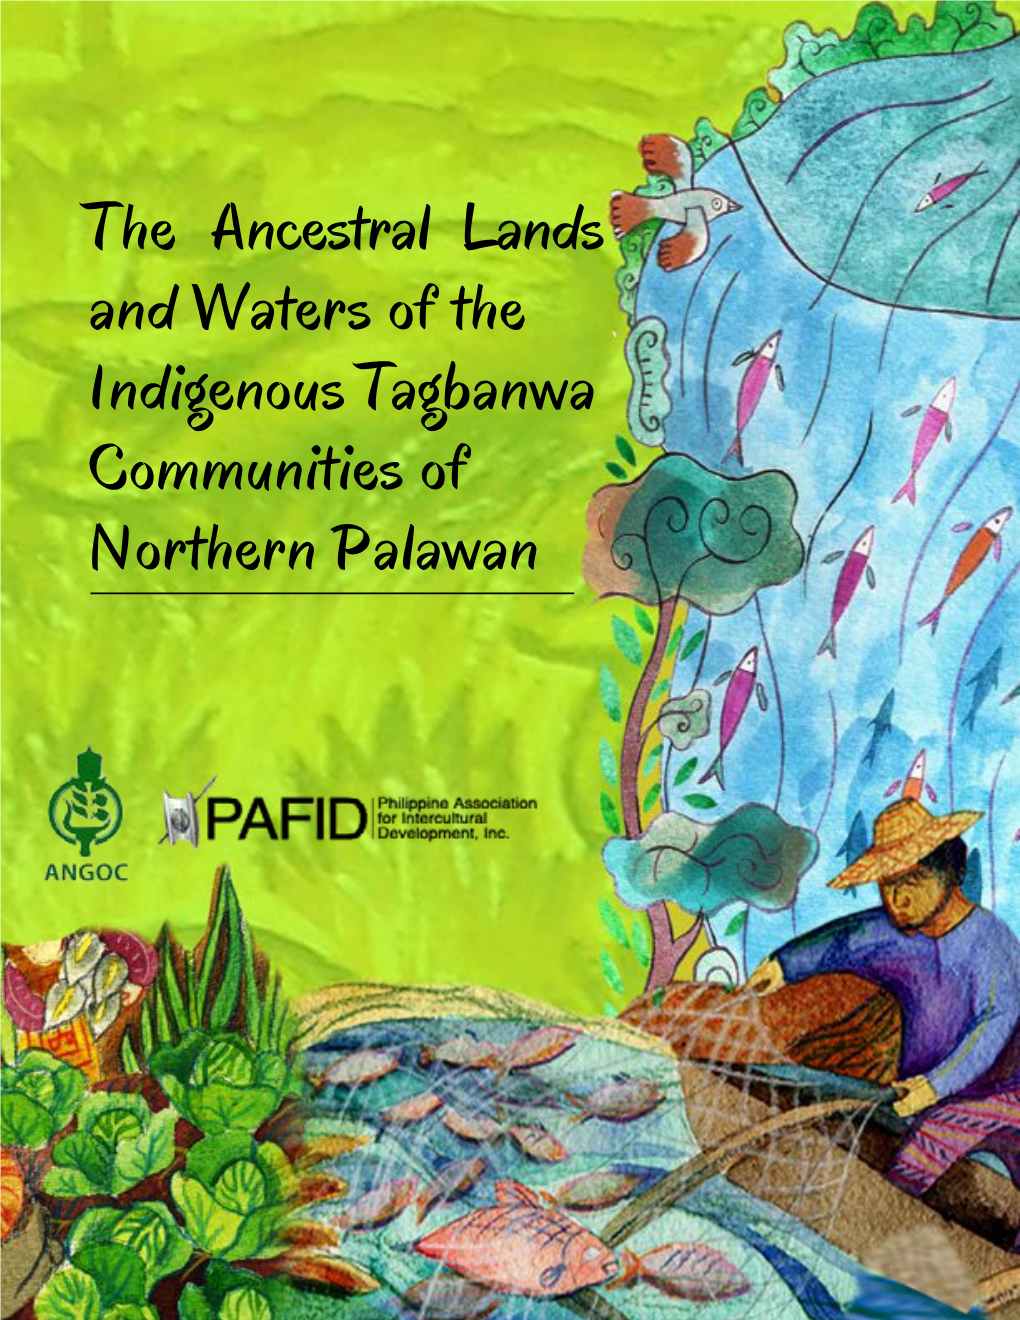 The Ancestral Lands and Waters of the Indigenous Tagbanwa Communities of Northern Palawan